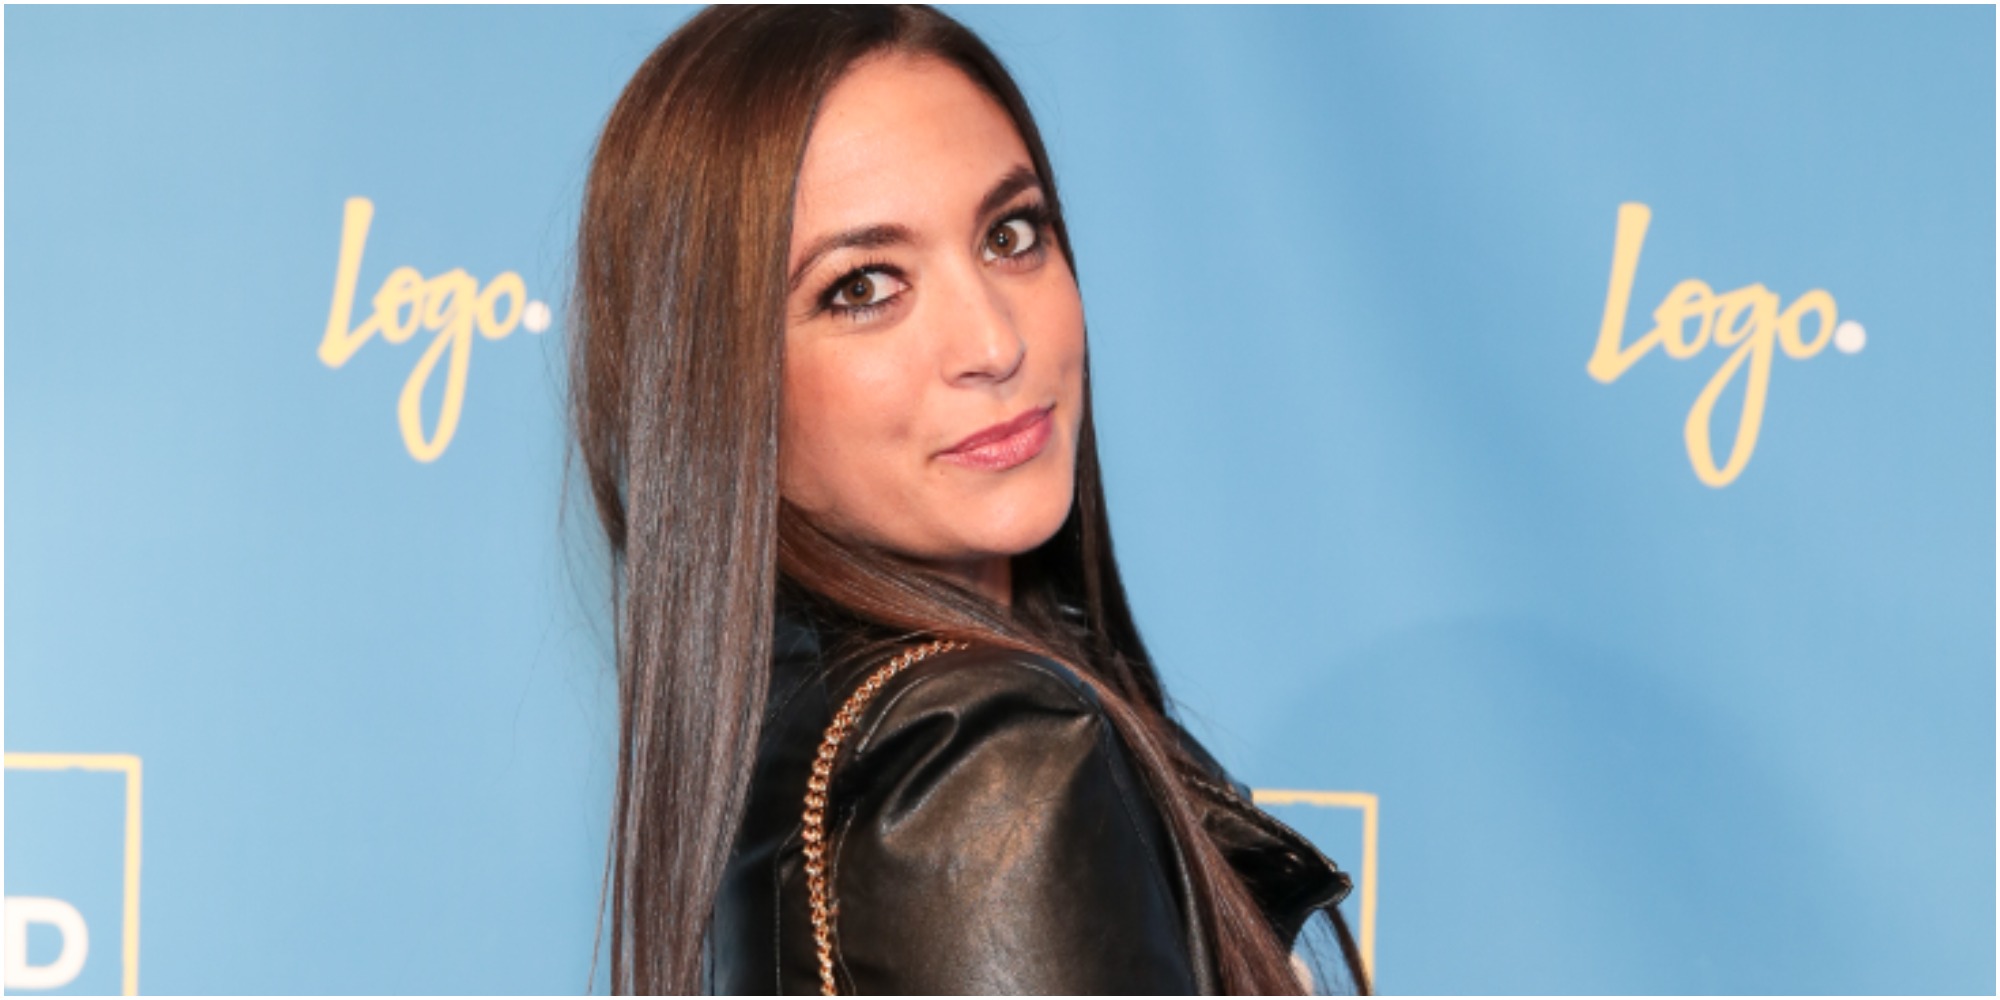 Sammi Giancola poses at a press event in a black jacket.